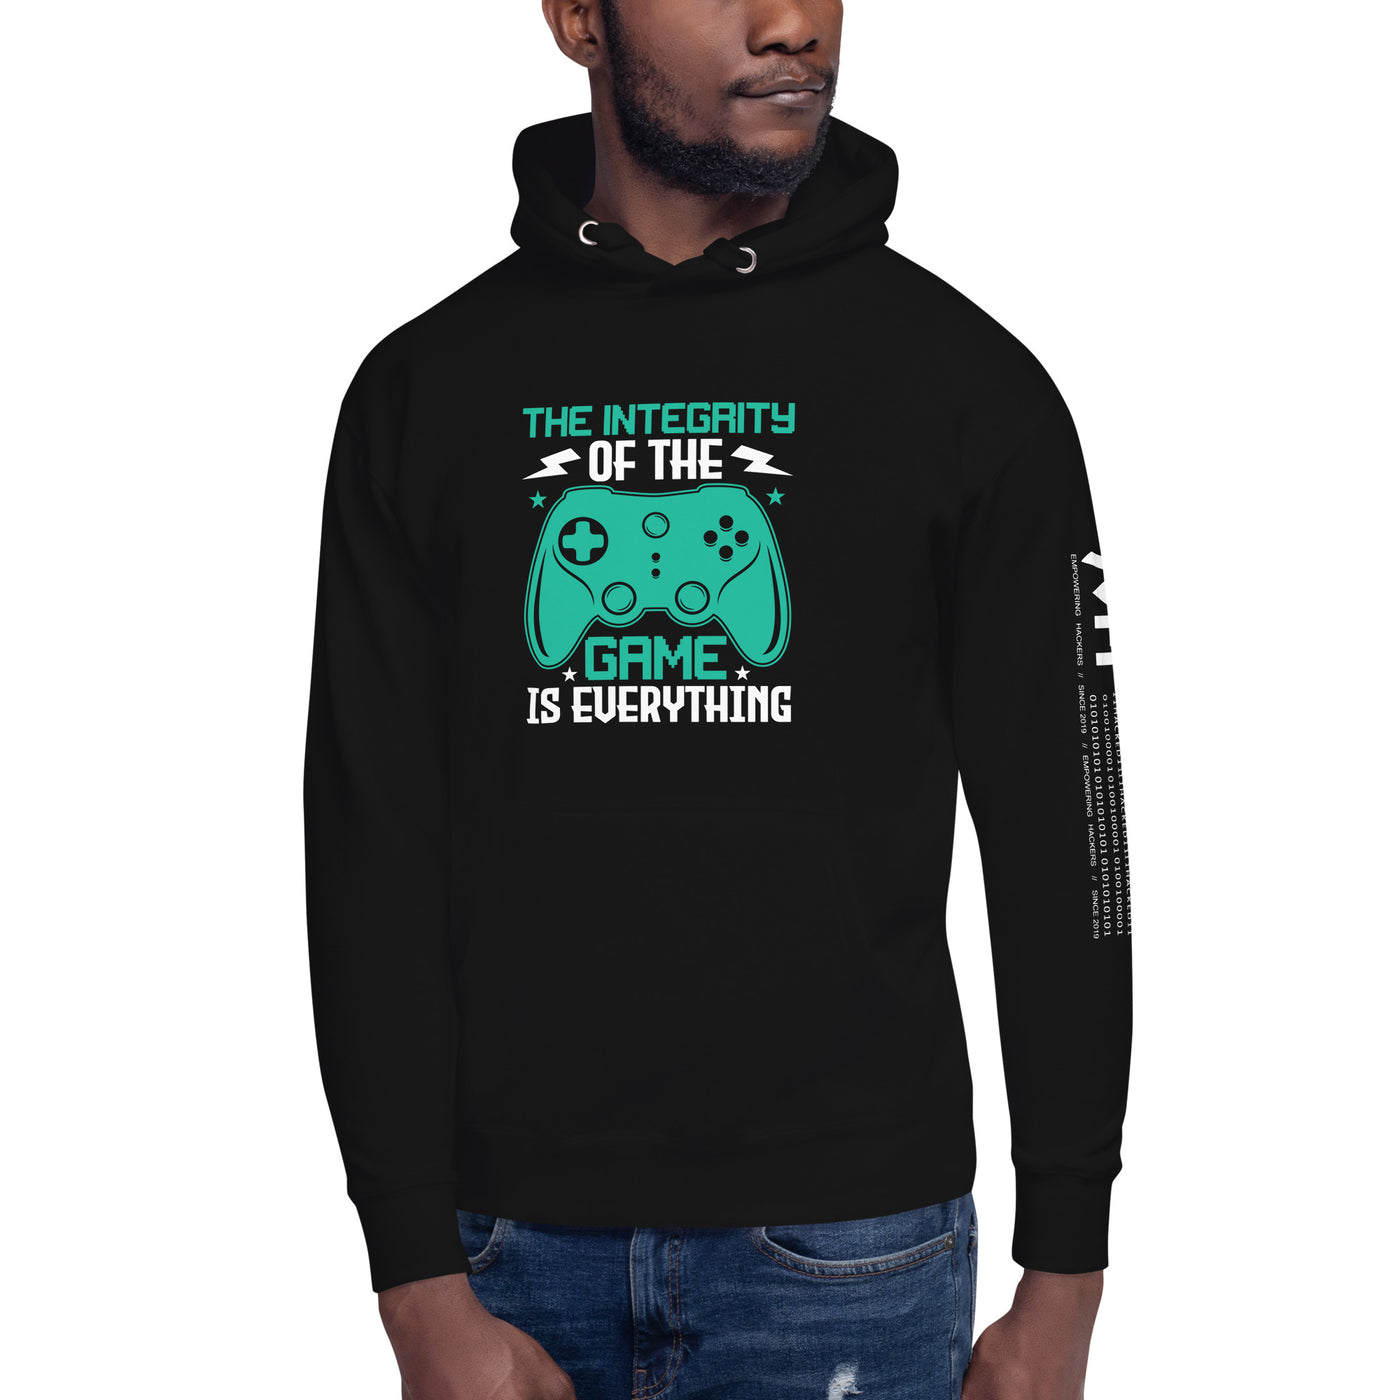 The Integrity of the Game is Everything (Swarna) - Unisex Hoodie